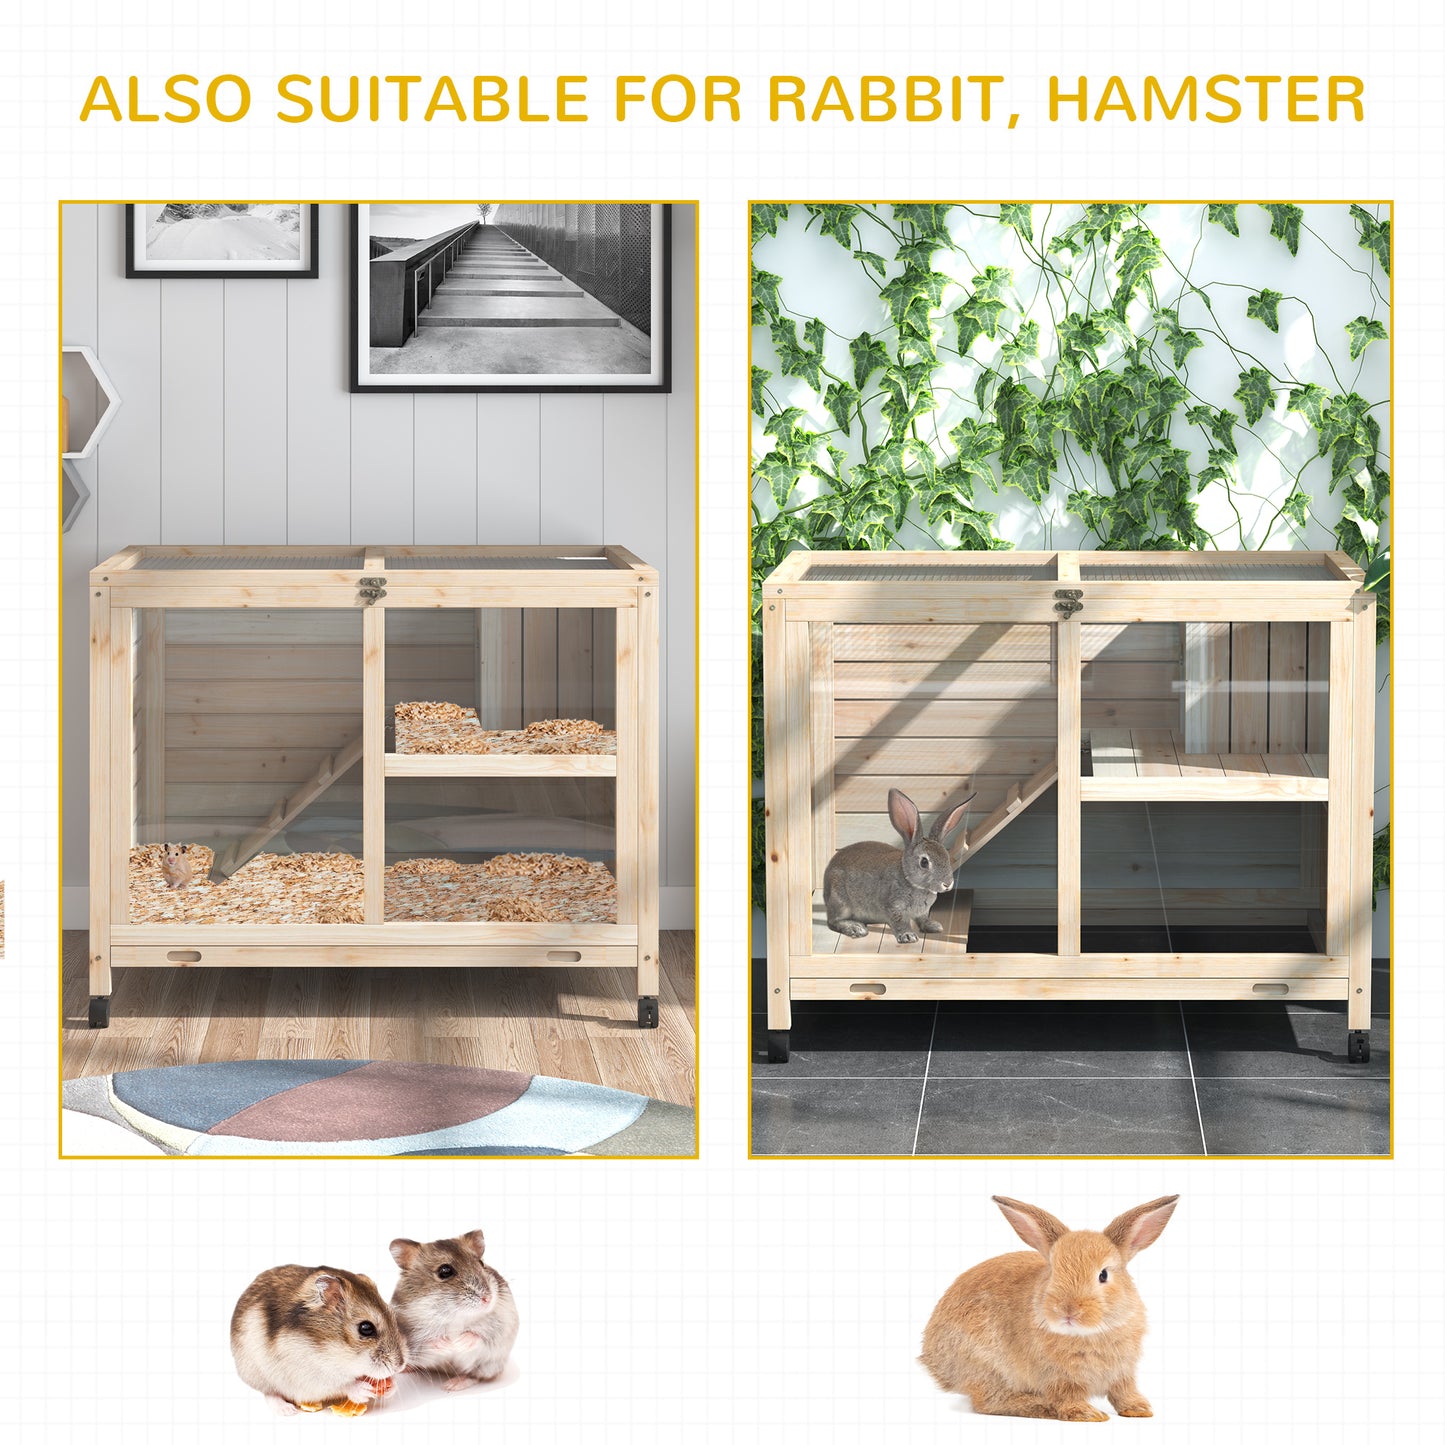 Wooden Rabbit Hutch, Guinea Pigs House, Guinea Pig Cage W/ Pull-out Tray Openable Roof Wheels 91.5 x 53.3 x 73 cm, Pawhut, 7